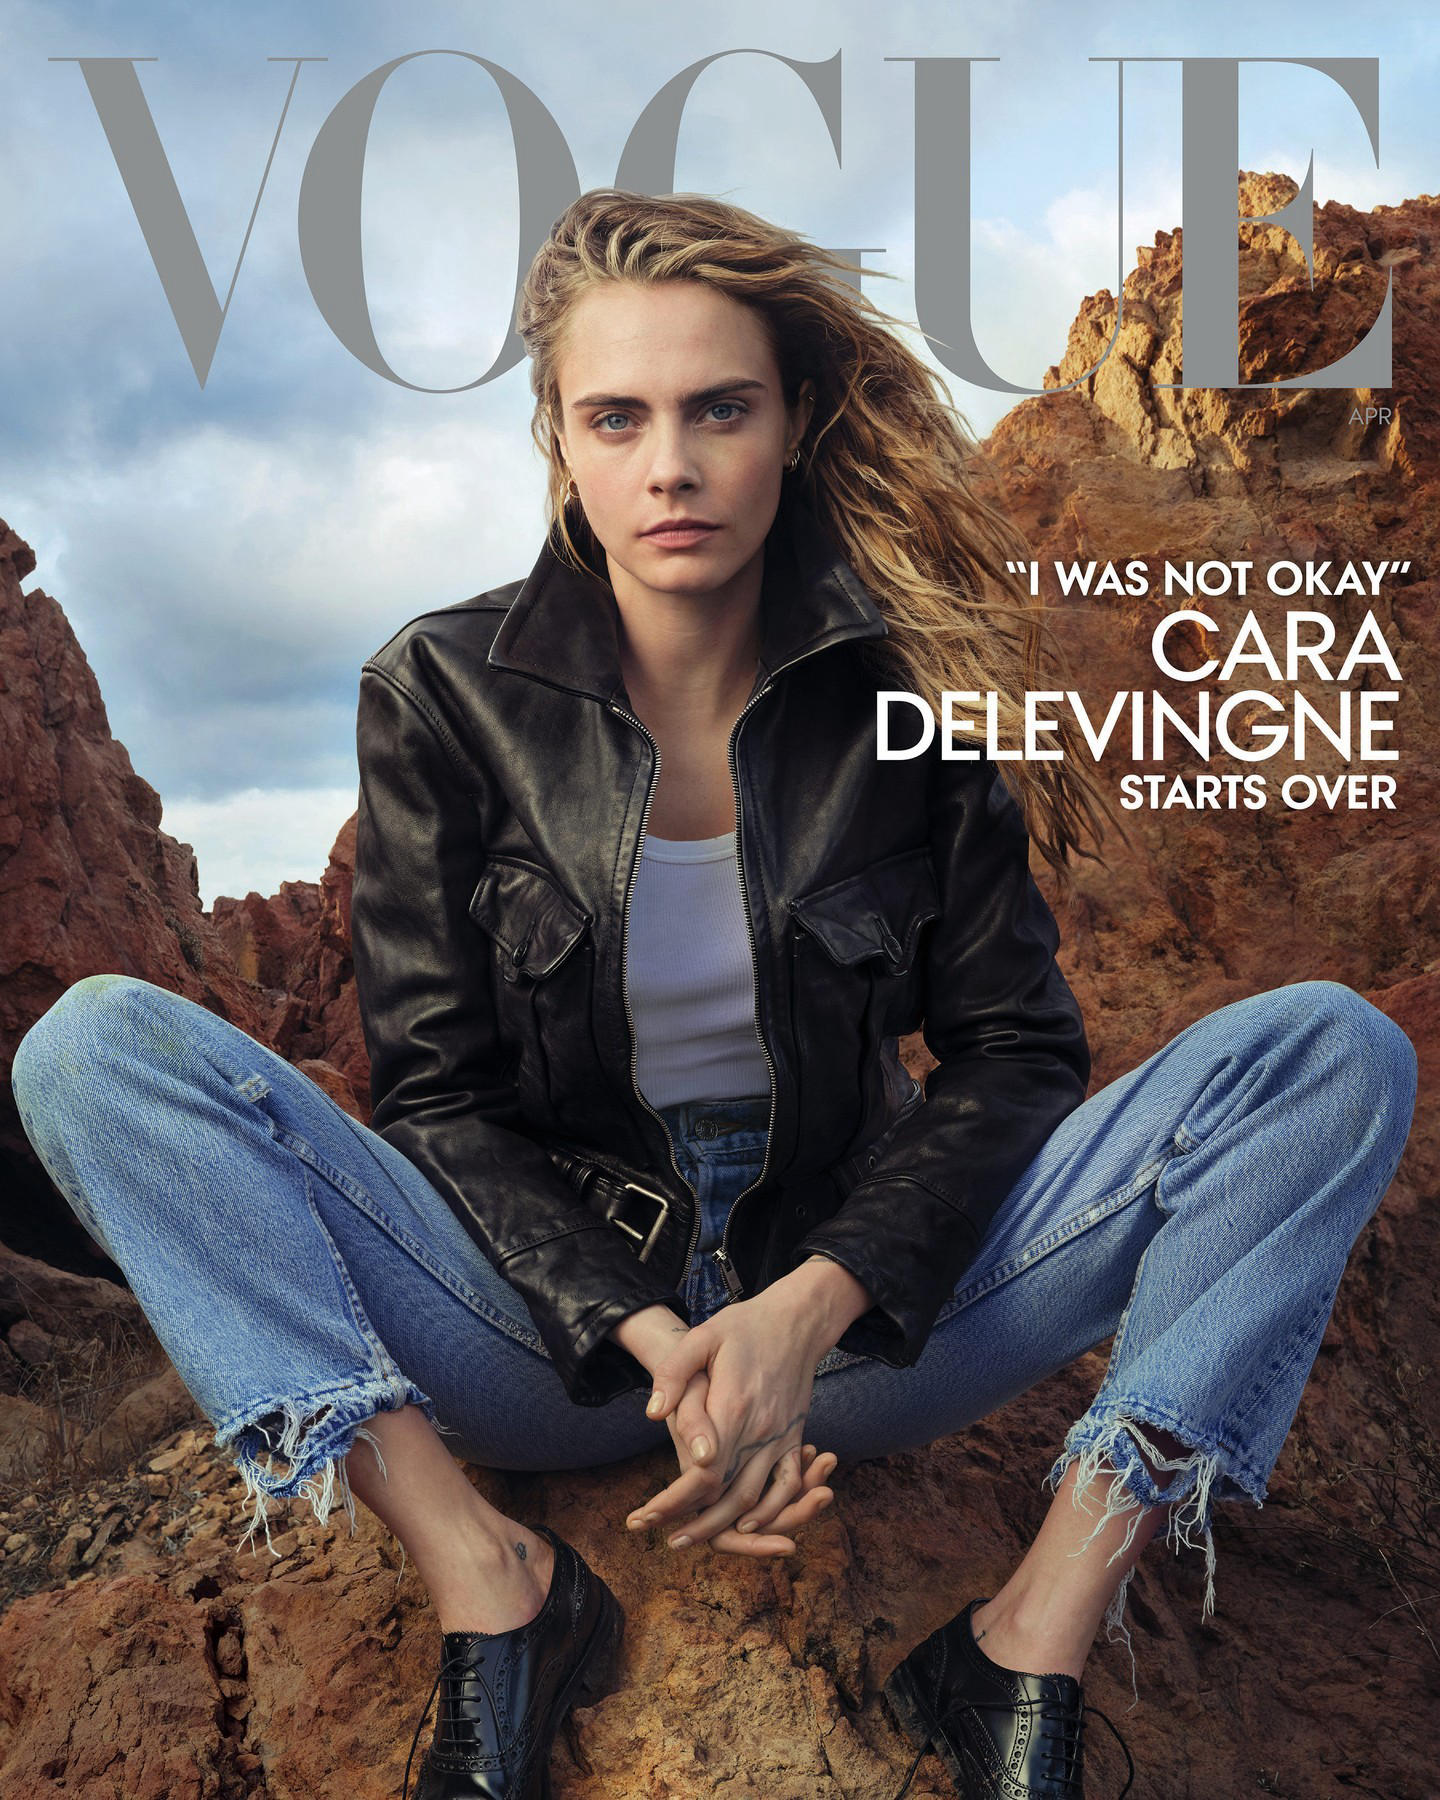 #CaraDelevingne is ready to start over